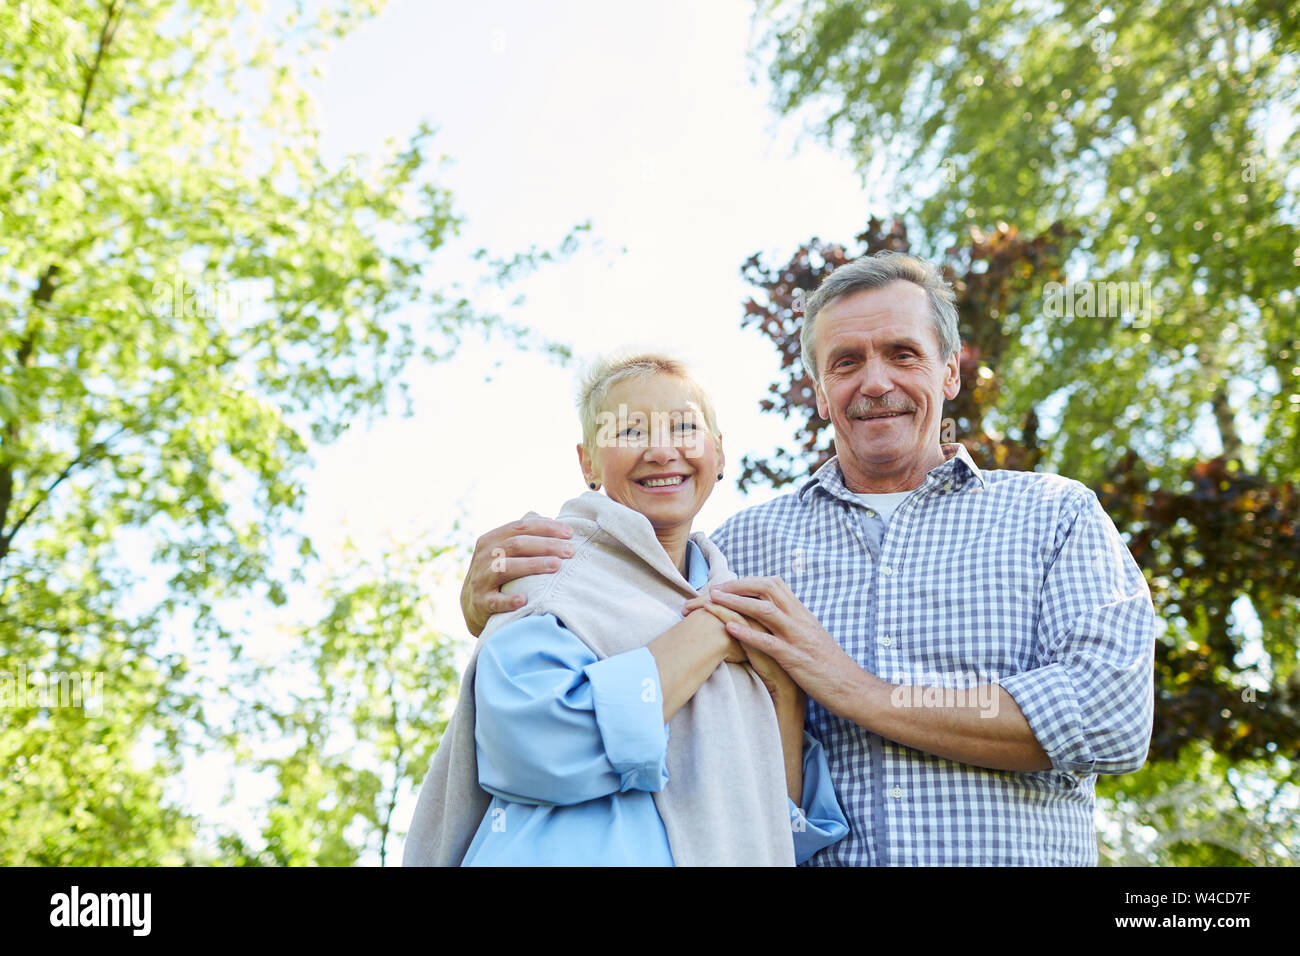 Low angle portrait of happy senior couple looking at camera and smiling while walking in Summer park, copy space Stock Photo